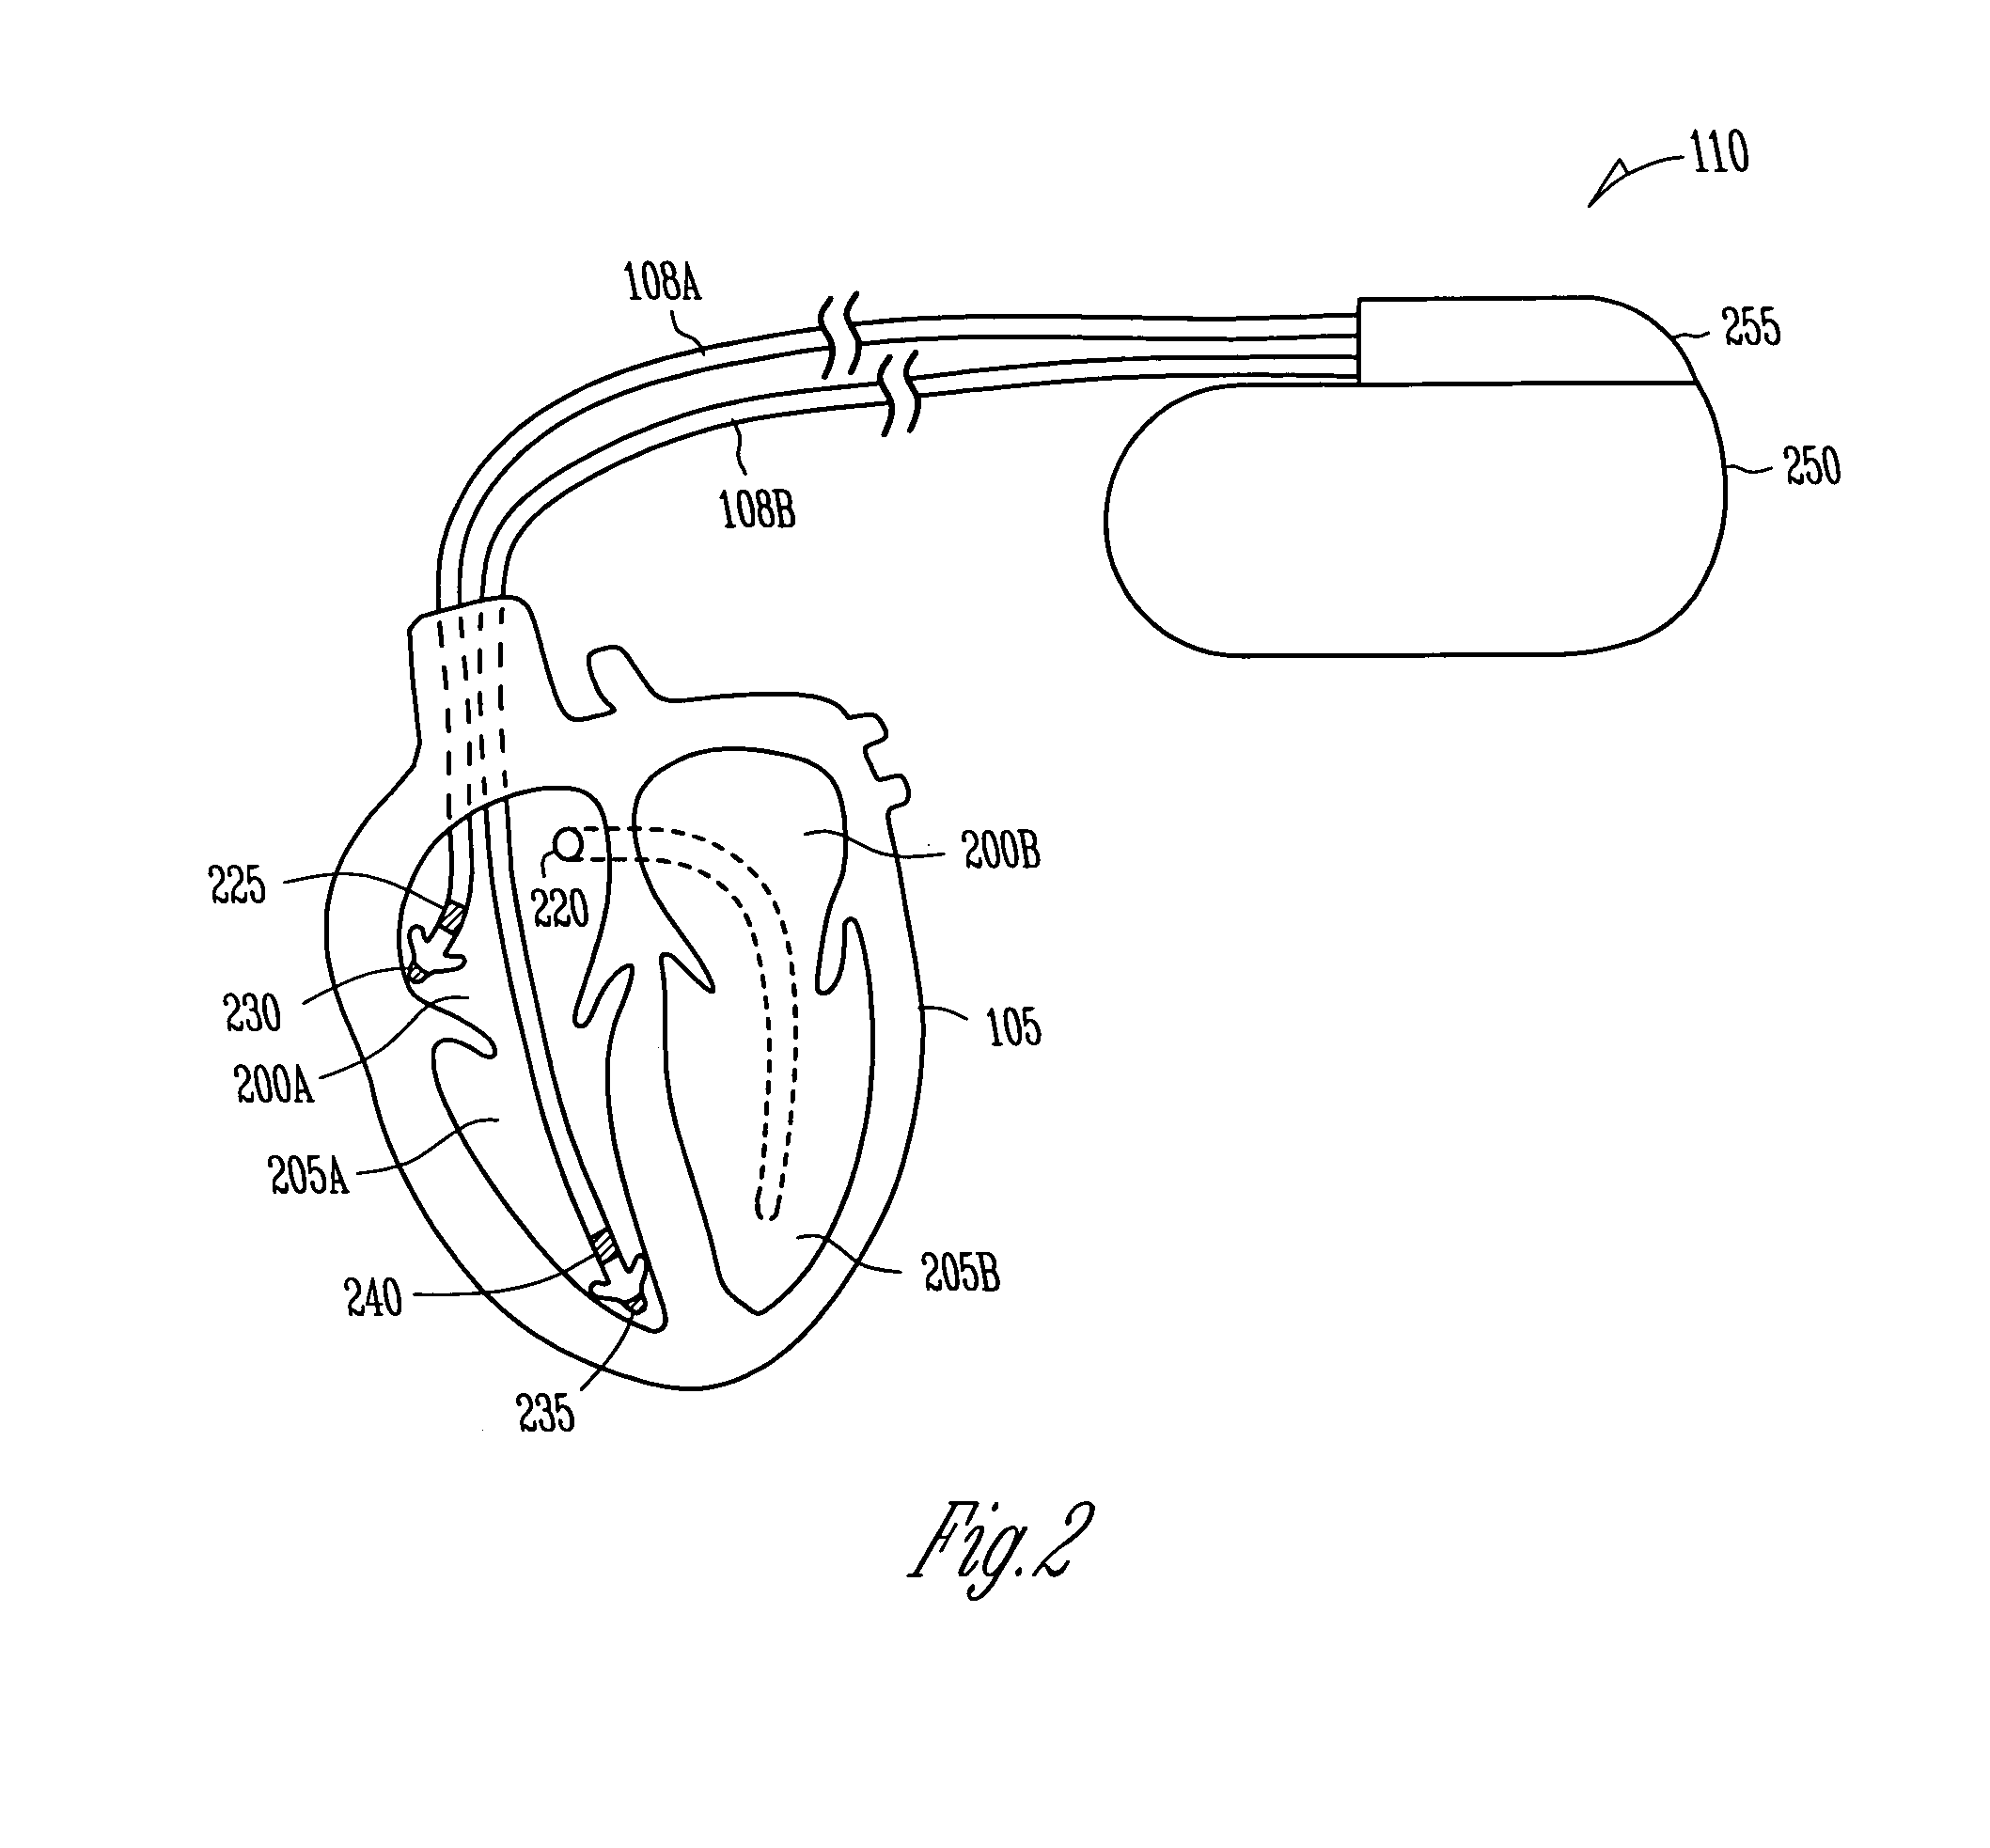 Adaptive software configuration for a medical device